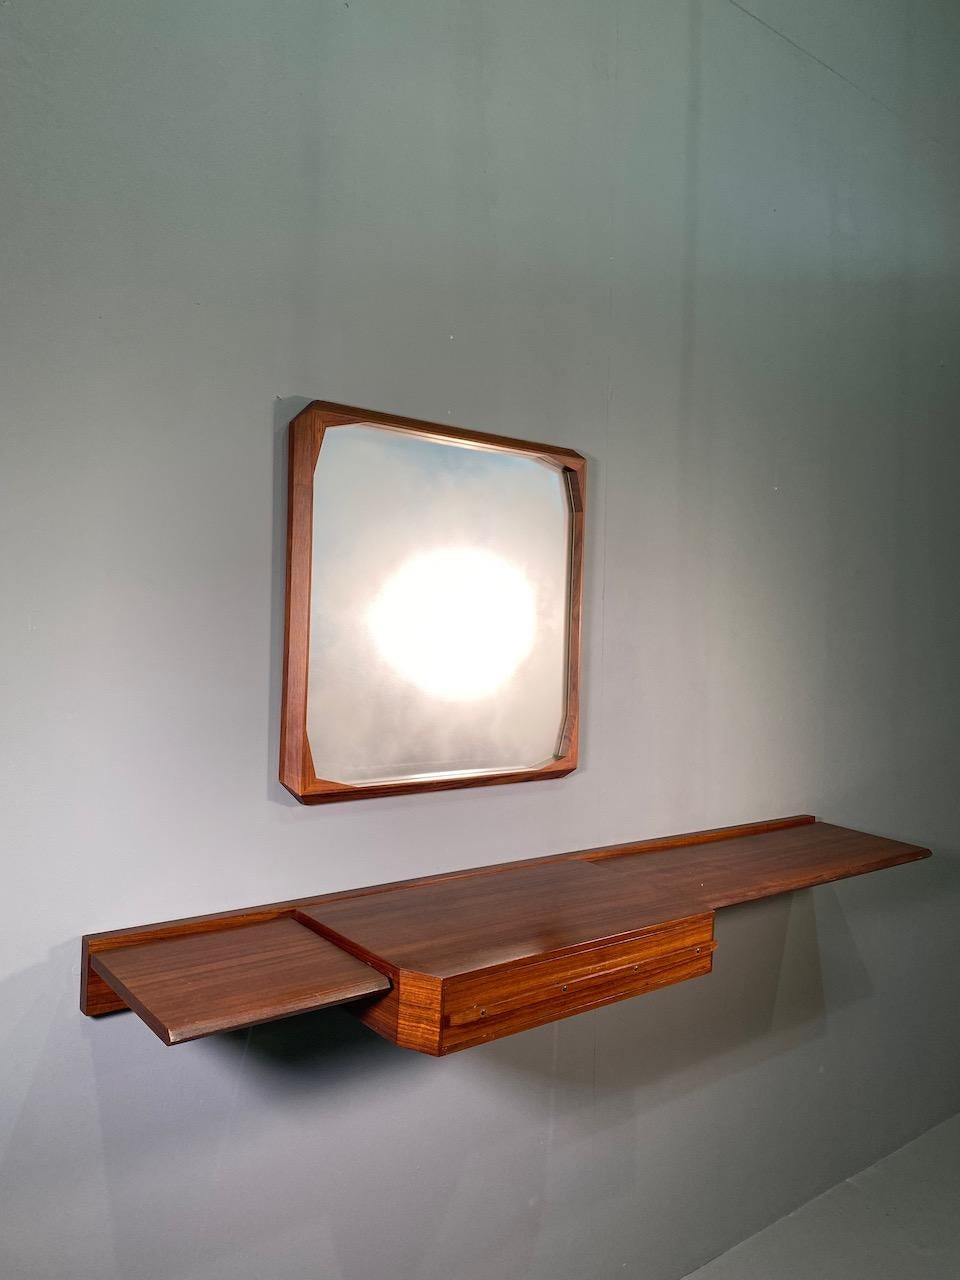 Italian Wall Console and Mirror by Tredici of Pavia i 1950s, Designed by Dino Cavalli